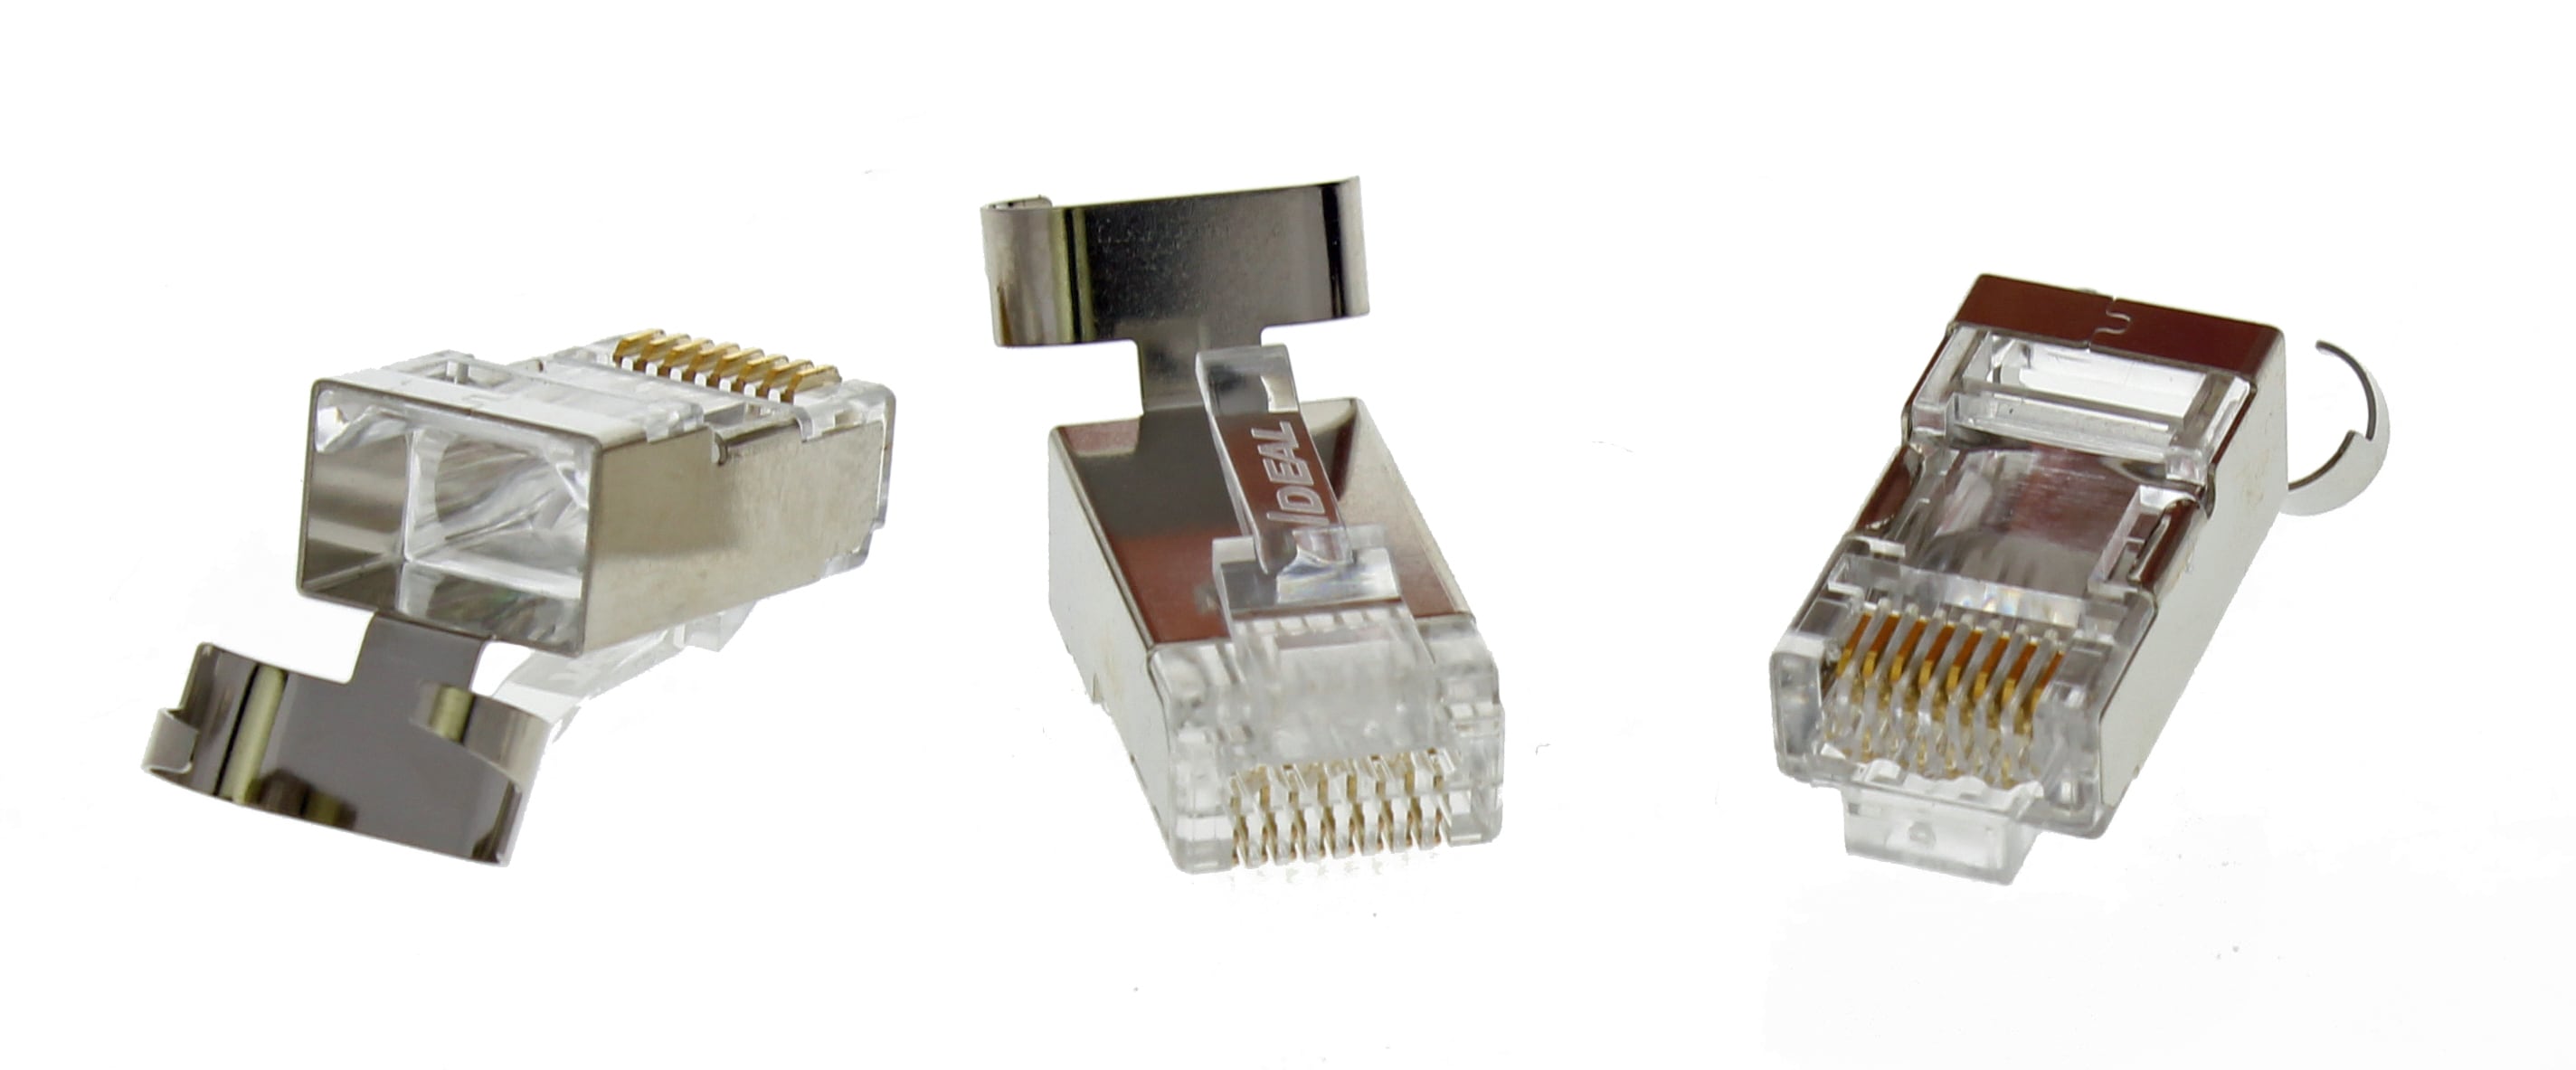 RJ45 Cat6 Connector with Guide Pack 10 units